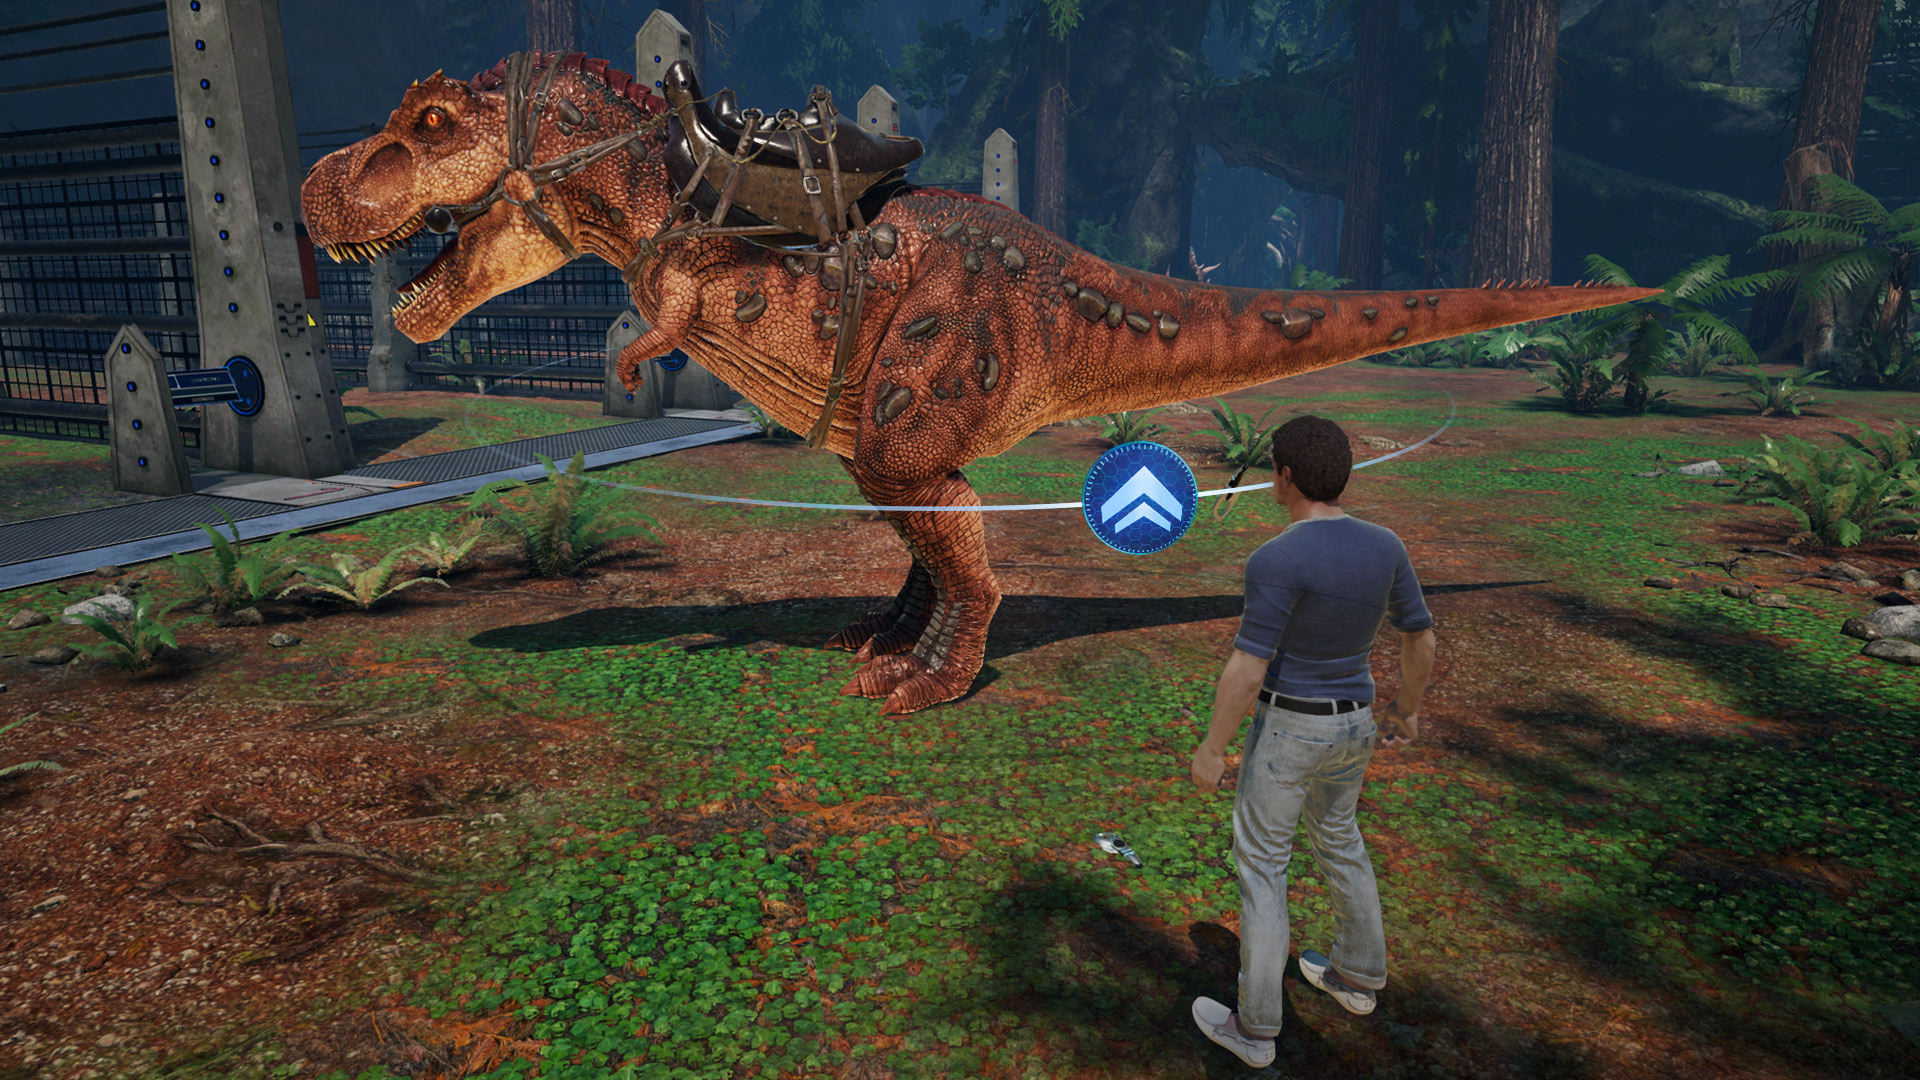 Snail Games Updates Ark Park To Bring Players A Better Dinosaur Vr Expereience Catsandvr